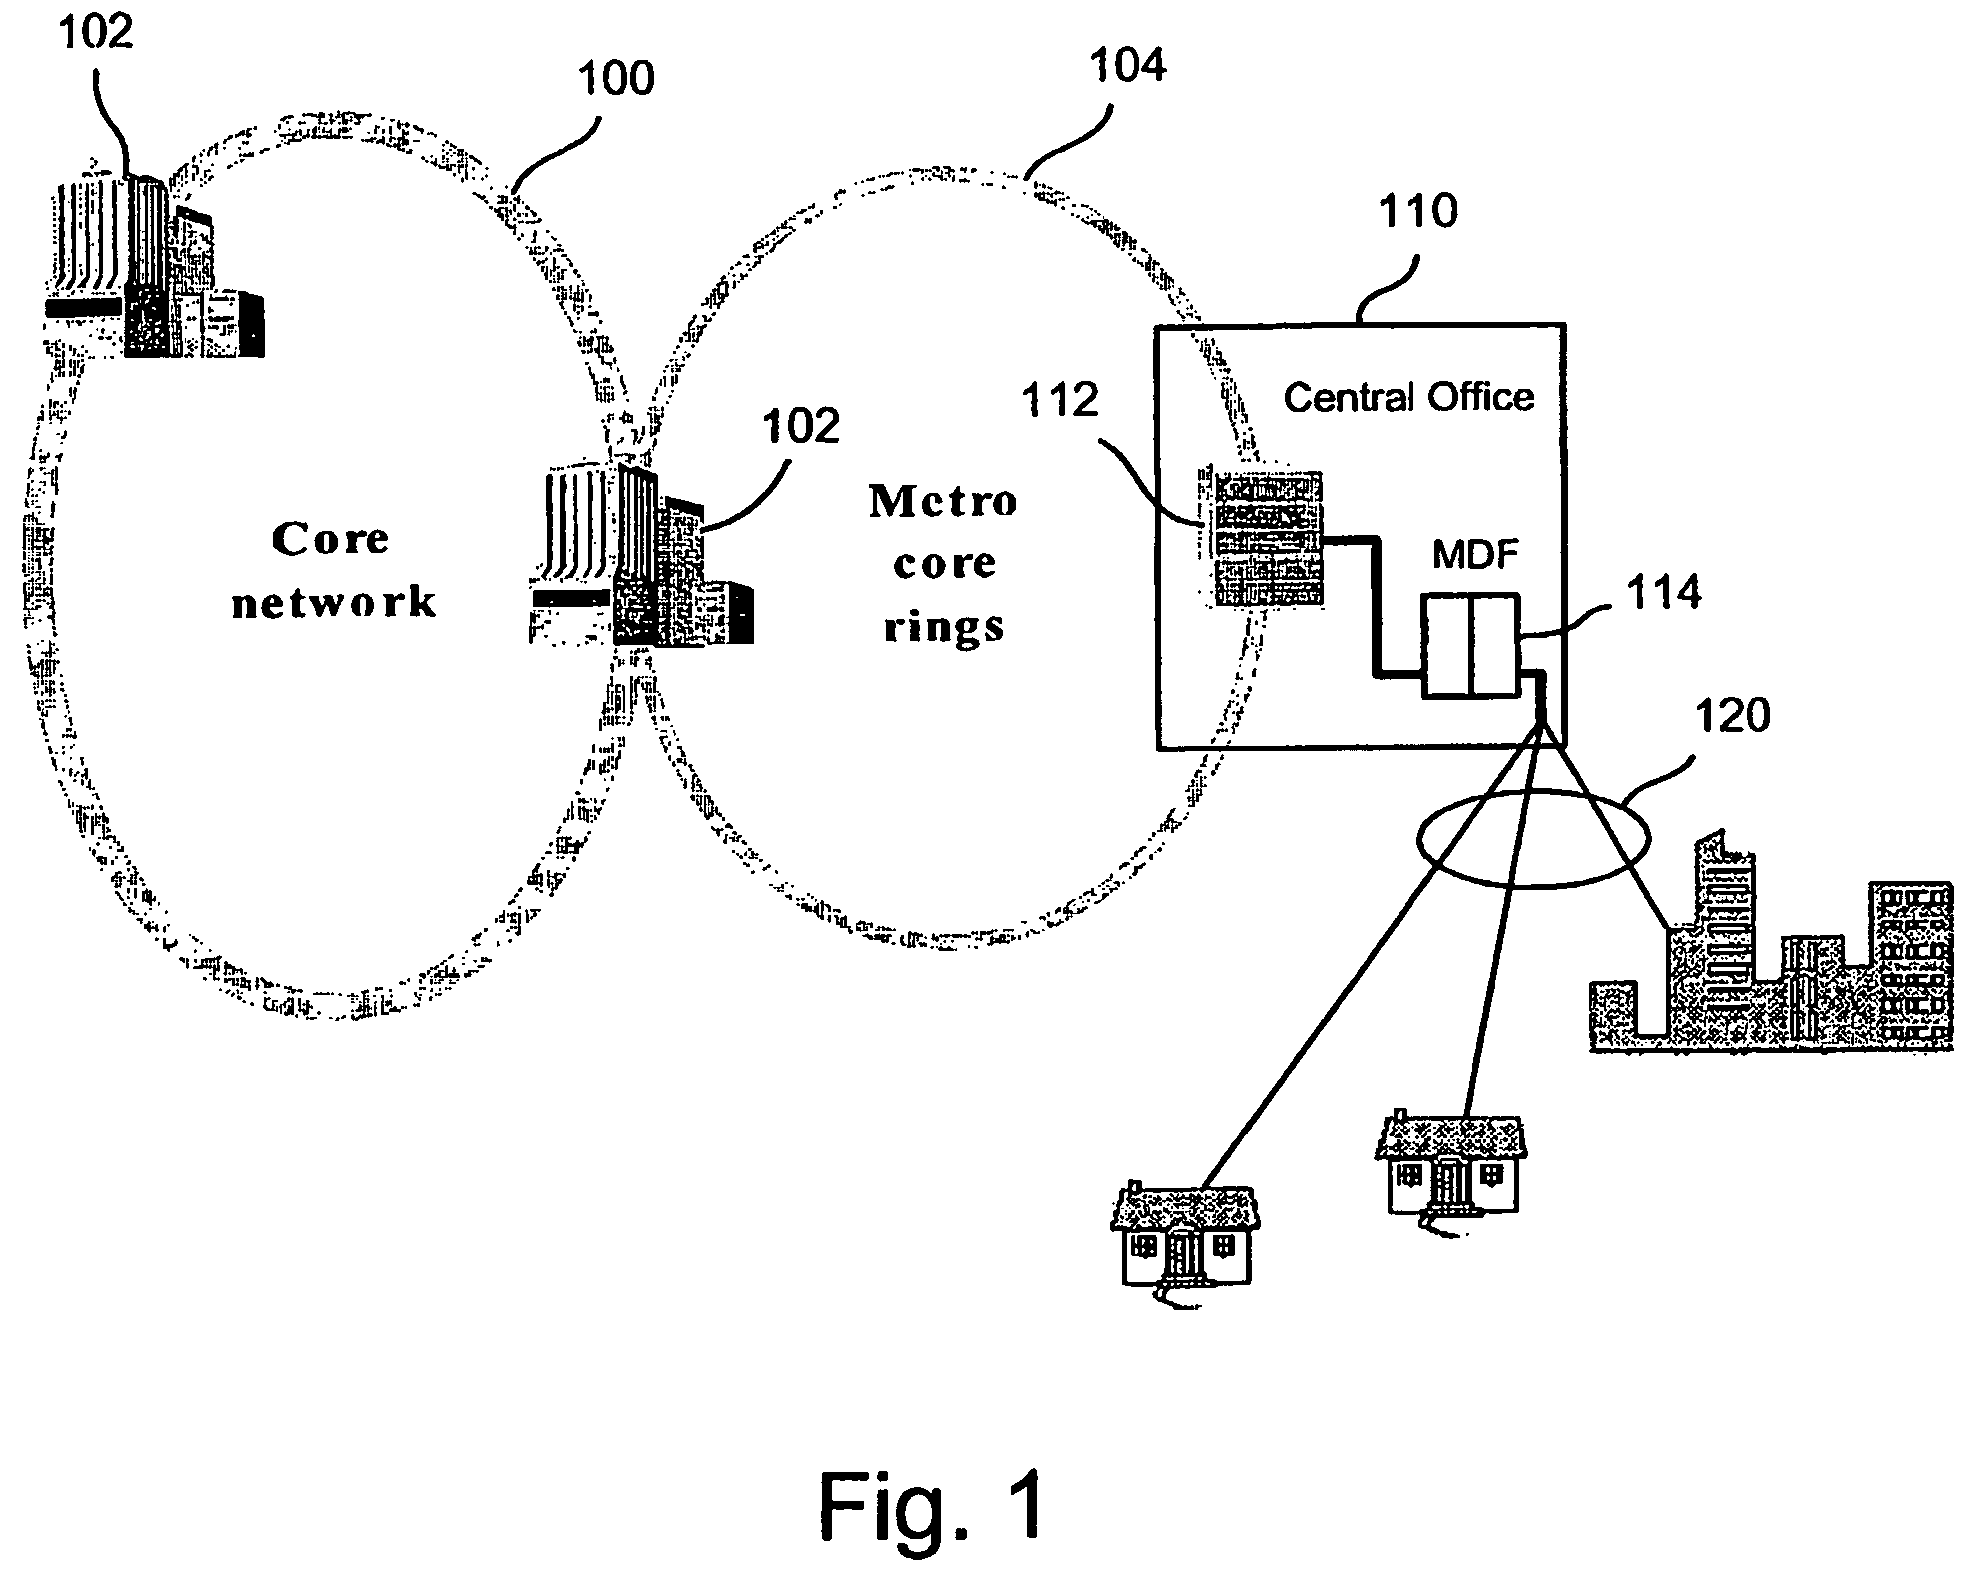 Method and system for remotely automating cross-connects in telecom networks